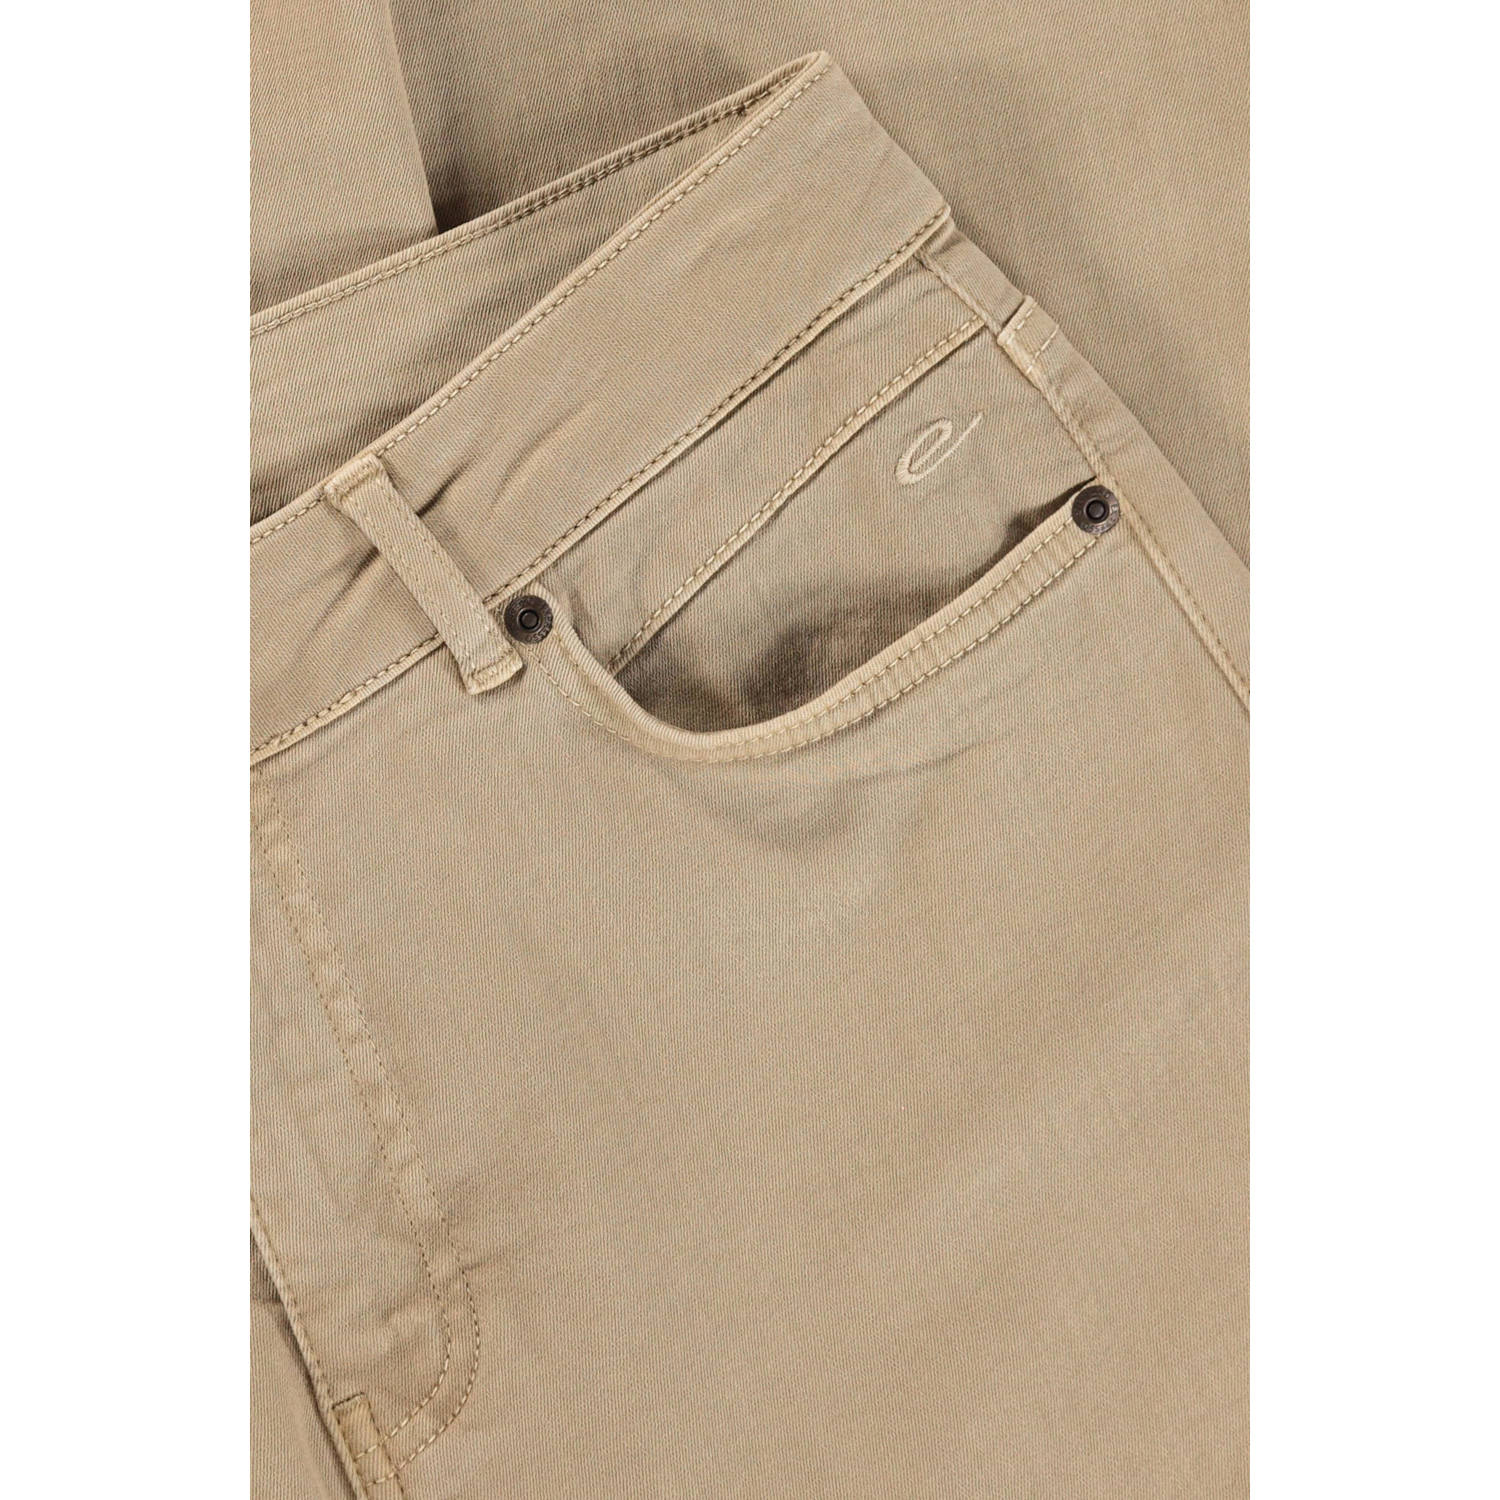 Expresso flared jeans beige